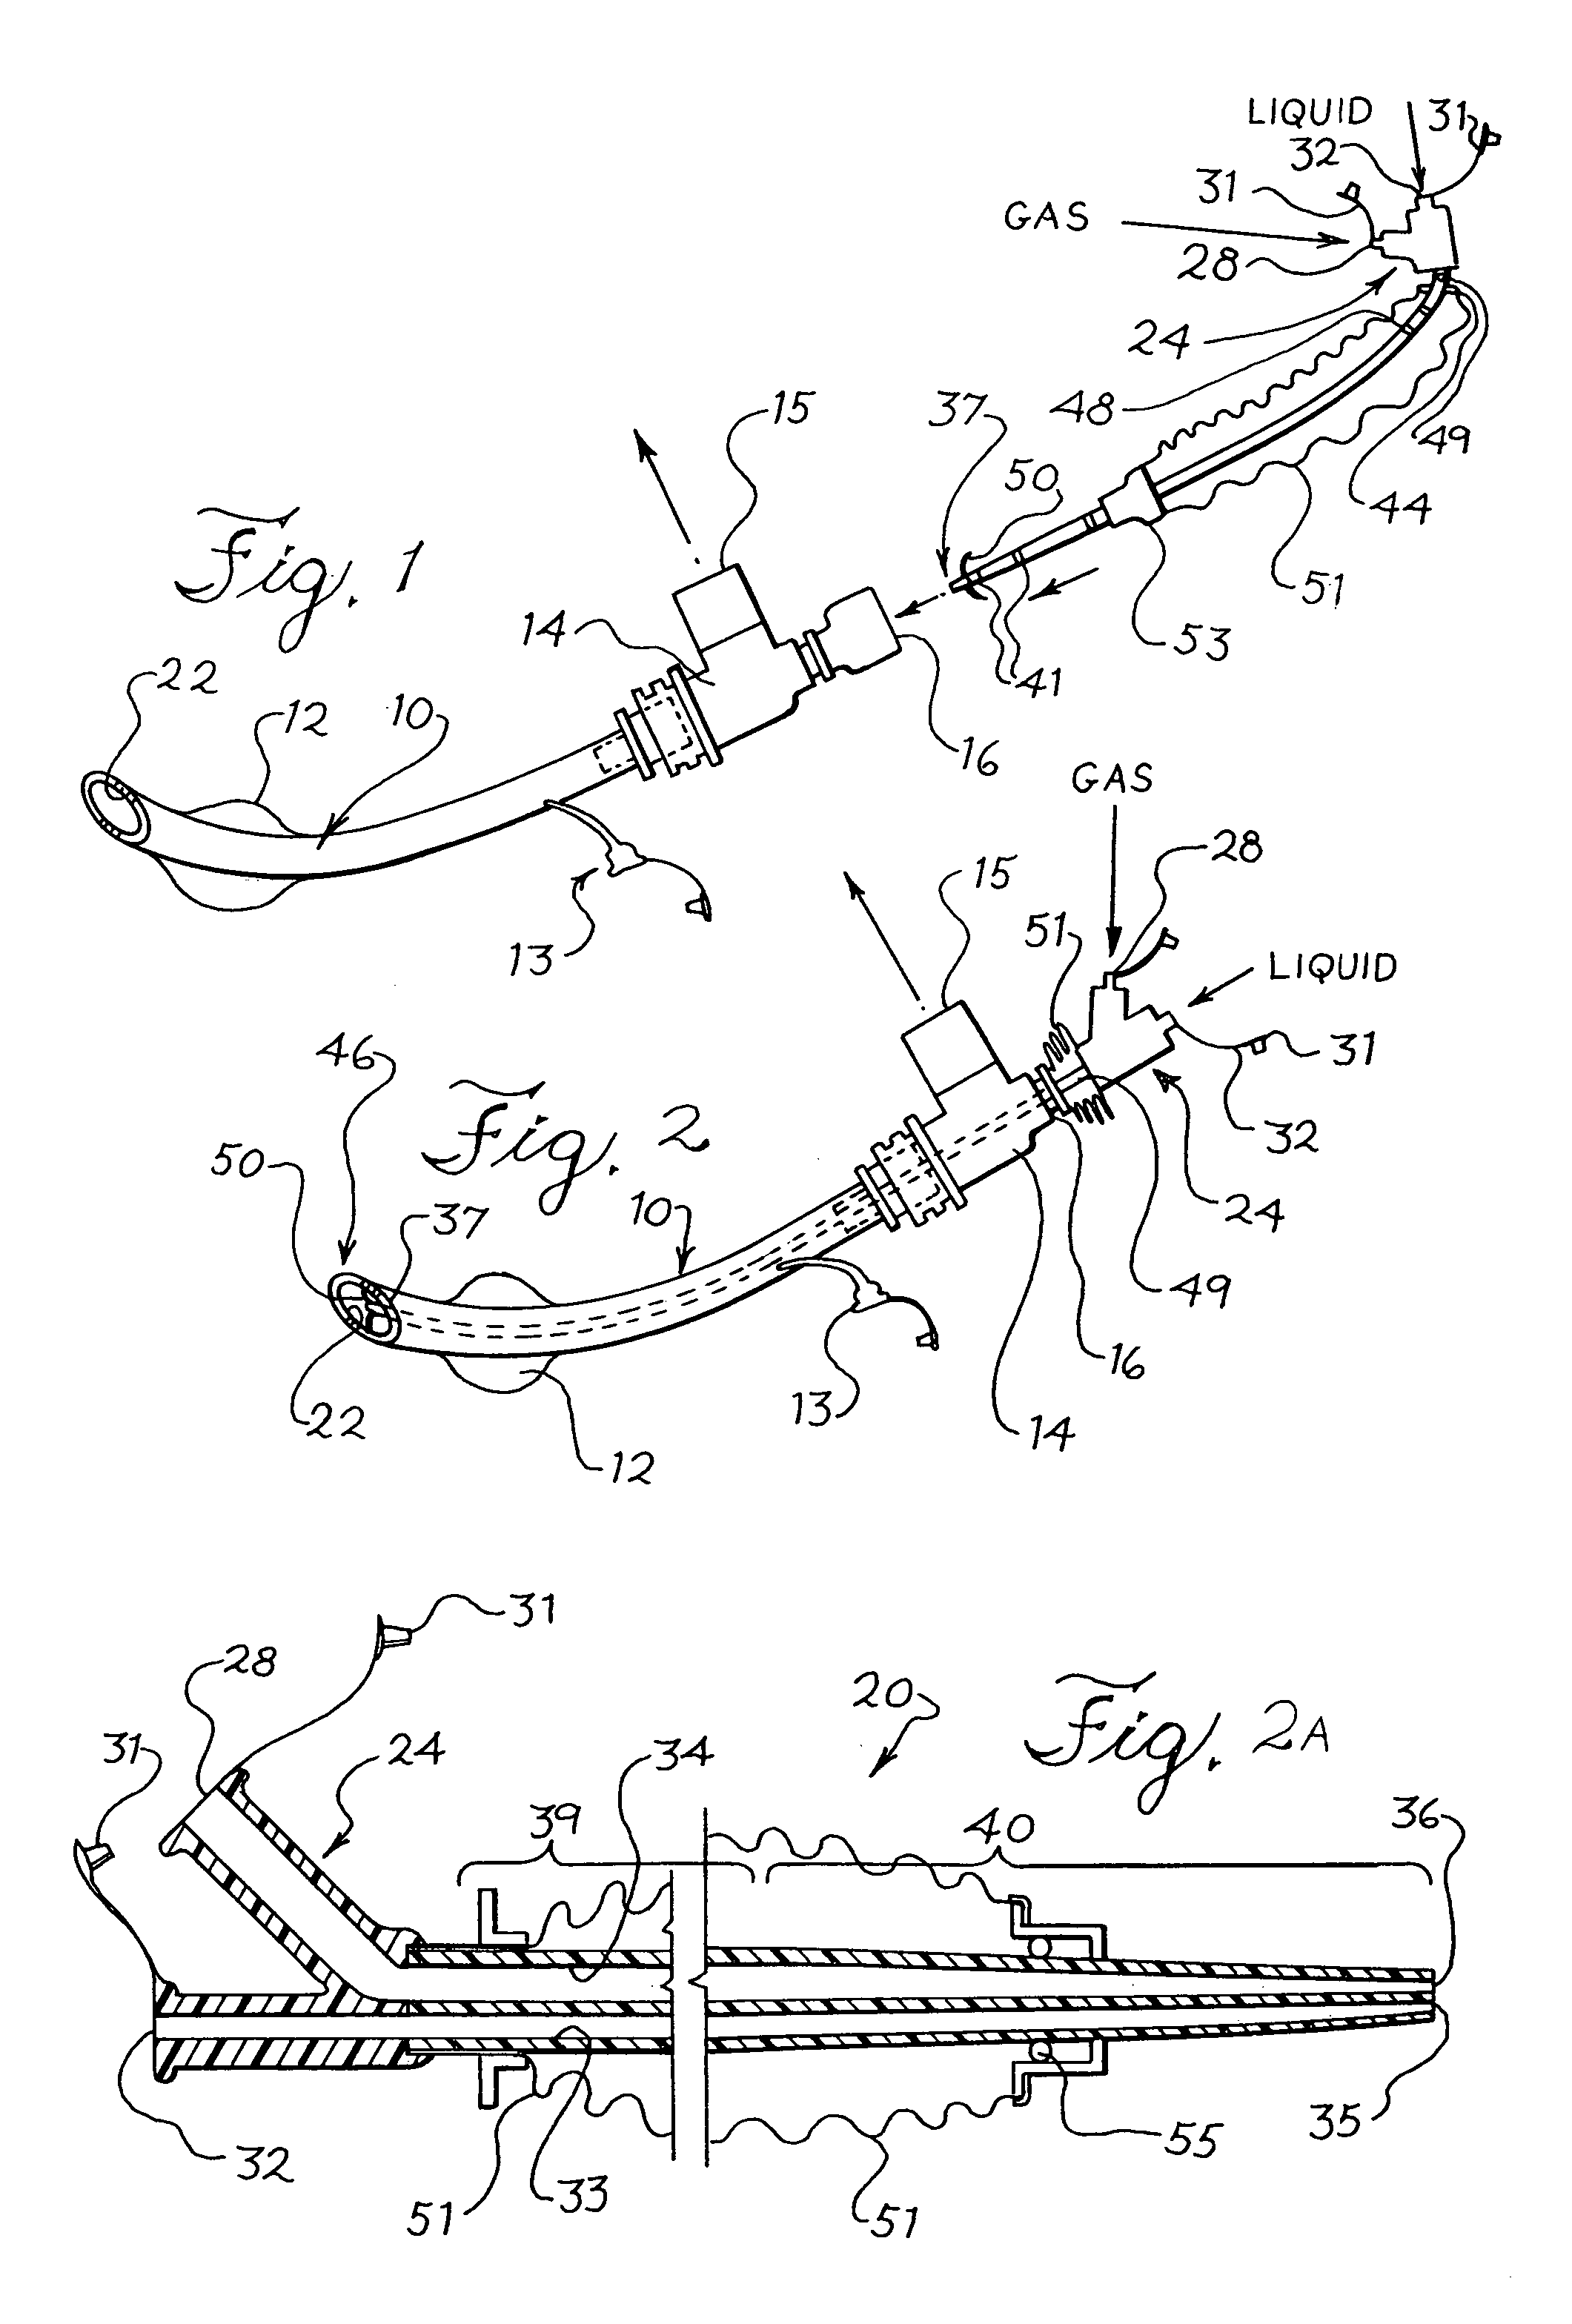 Nebulizing catheter system for delivering an aerosol to a patient